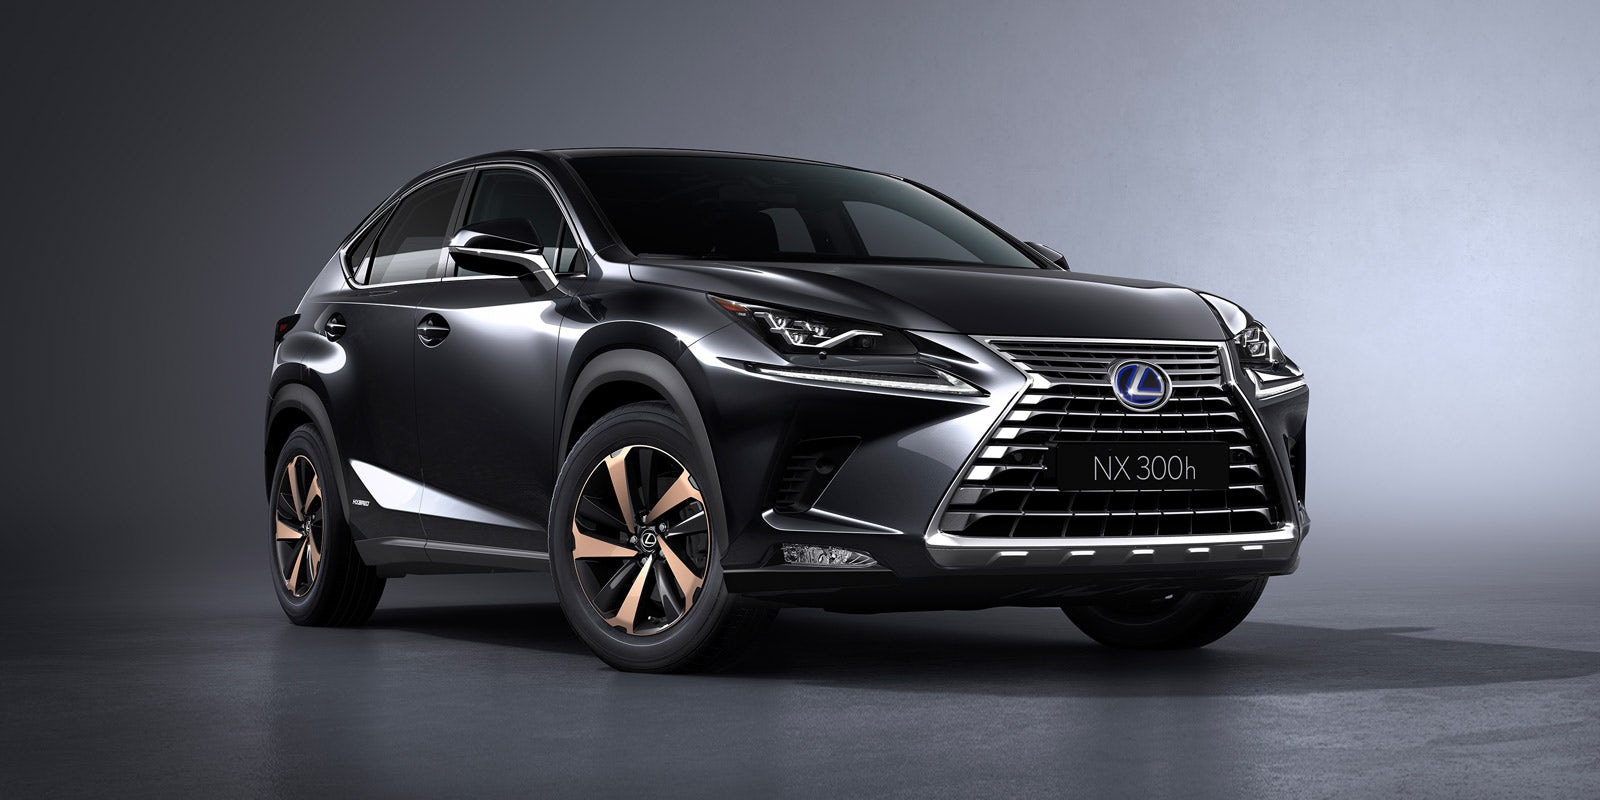 18 Lexus Nx Facelift Price Specs And Release Date Carwow